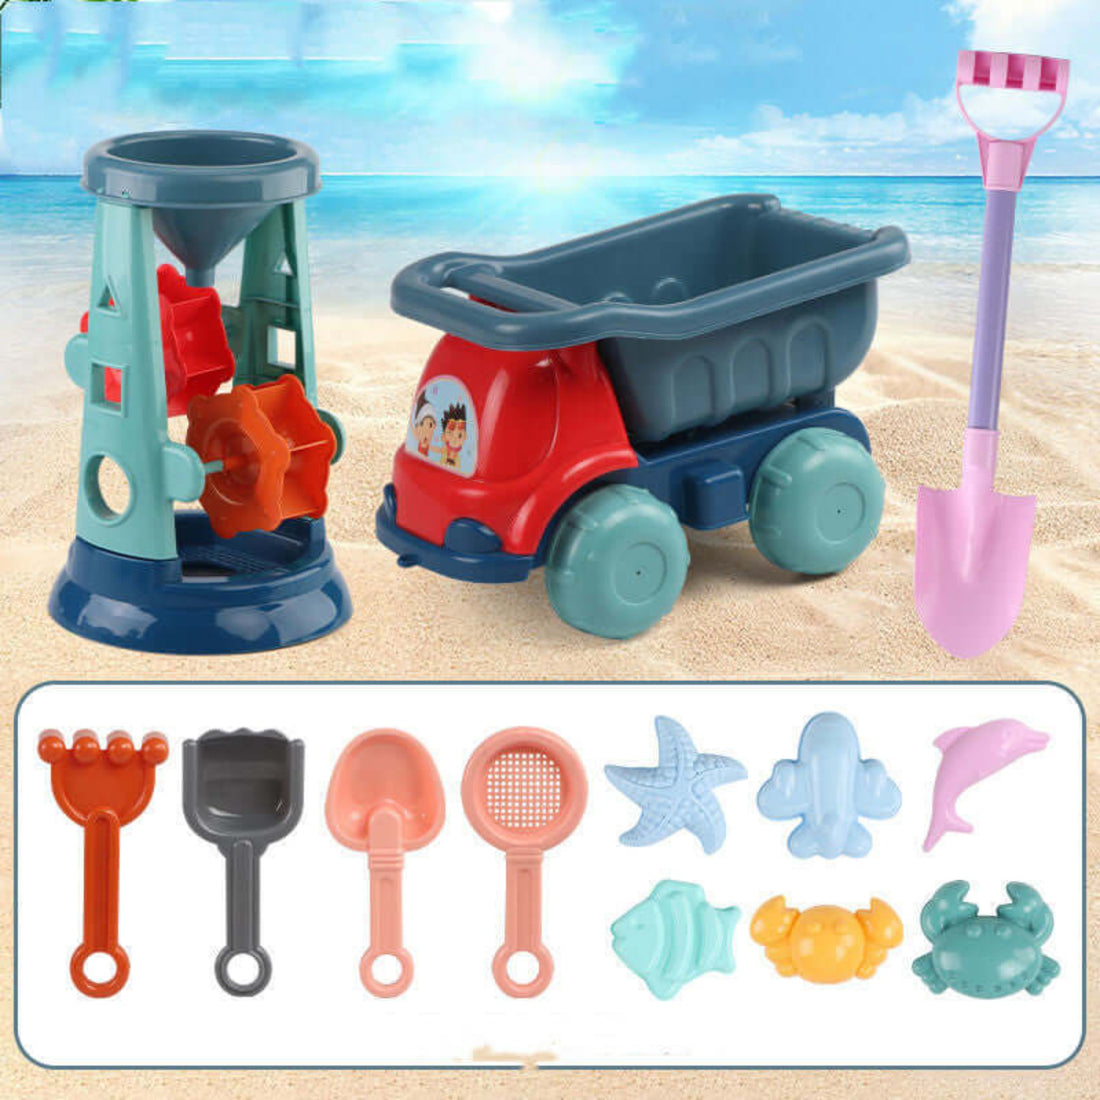 Colorful beach toy tools